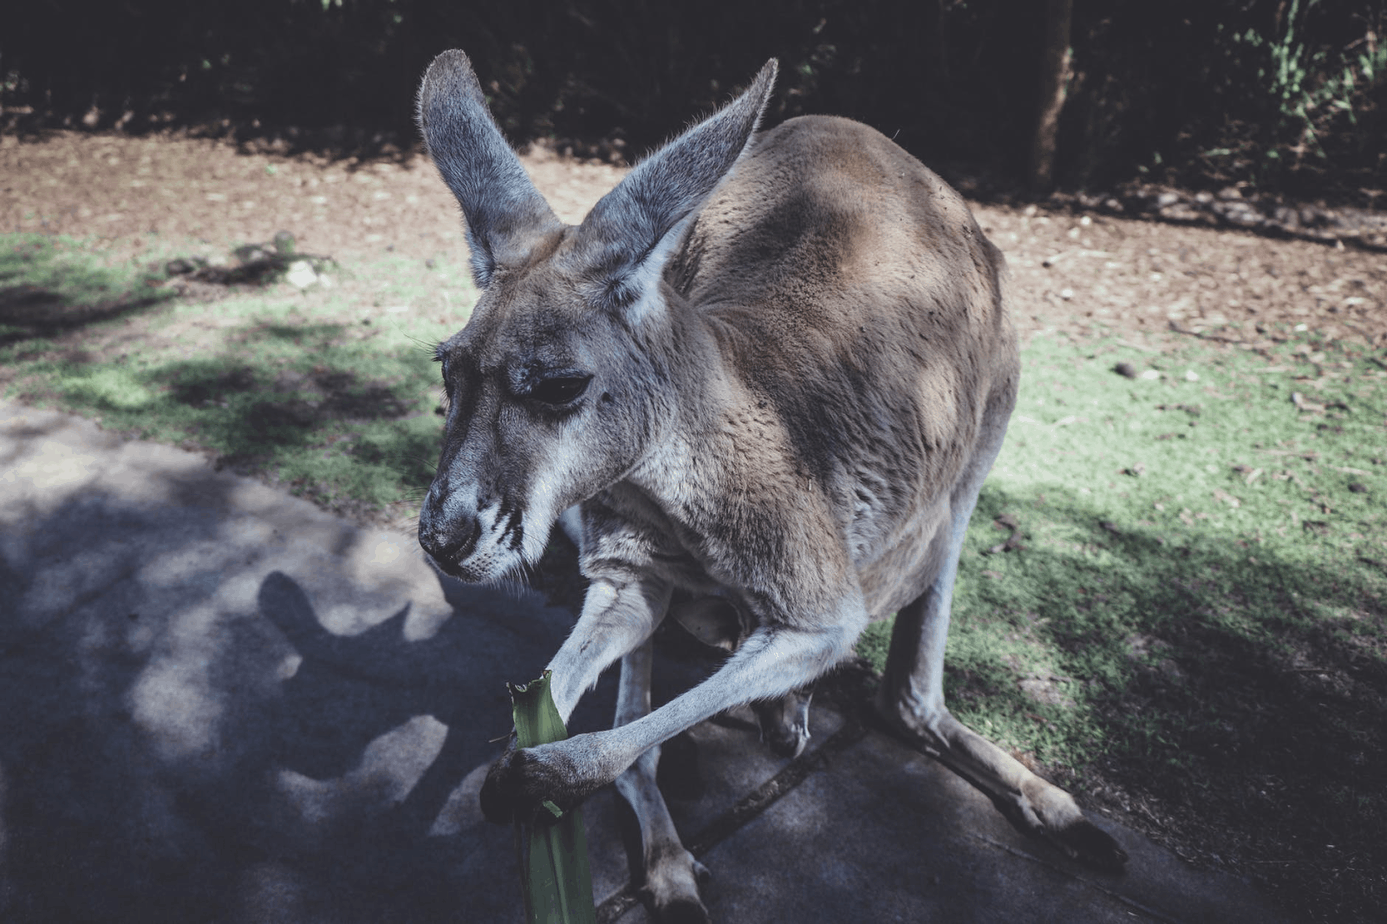 Why You Should Visit Australia: The Wildlife